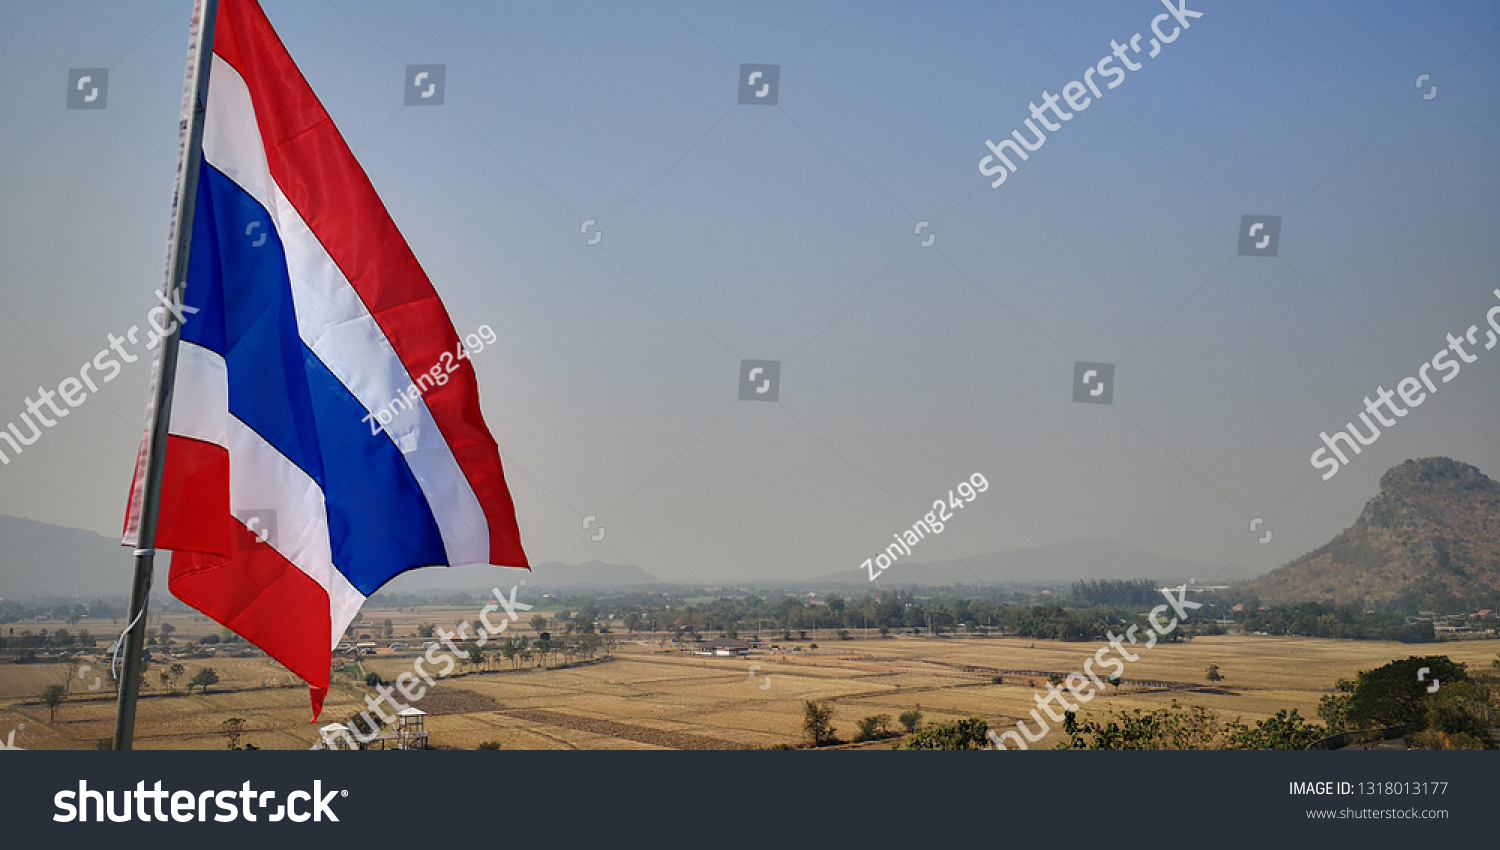 The national flag is the national flag of Thailand. #1318013177